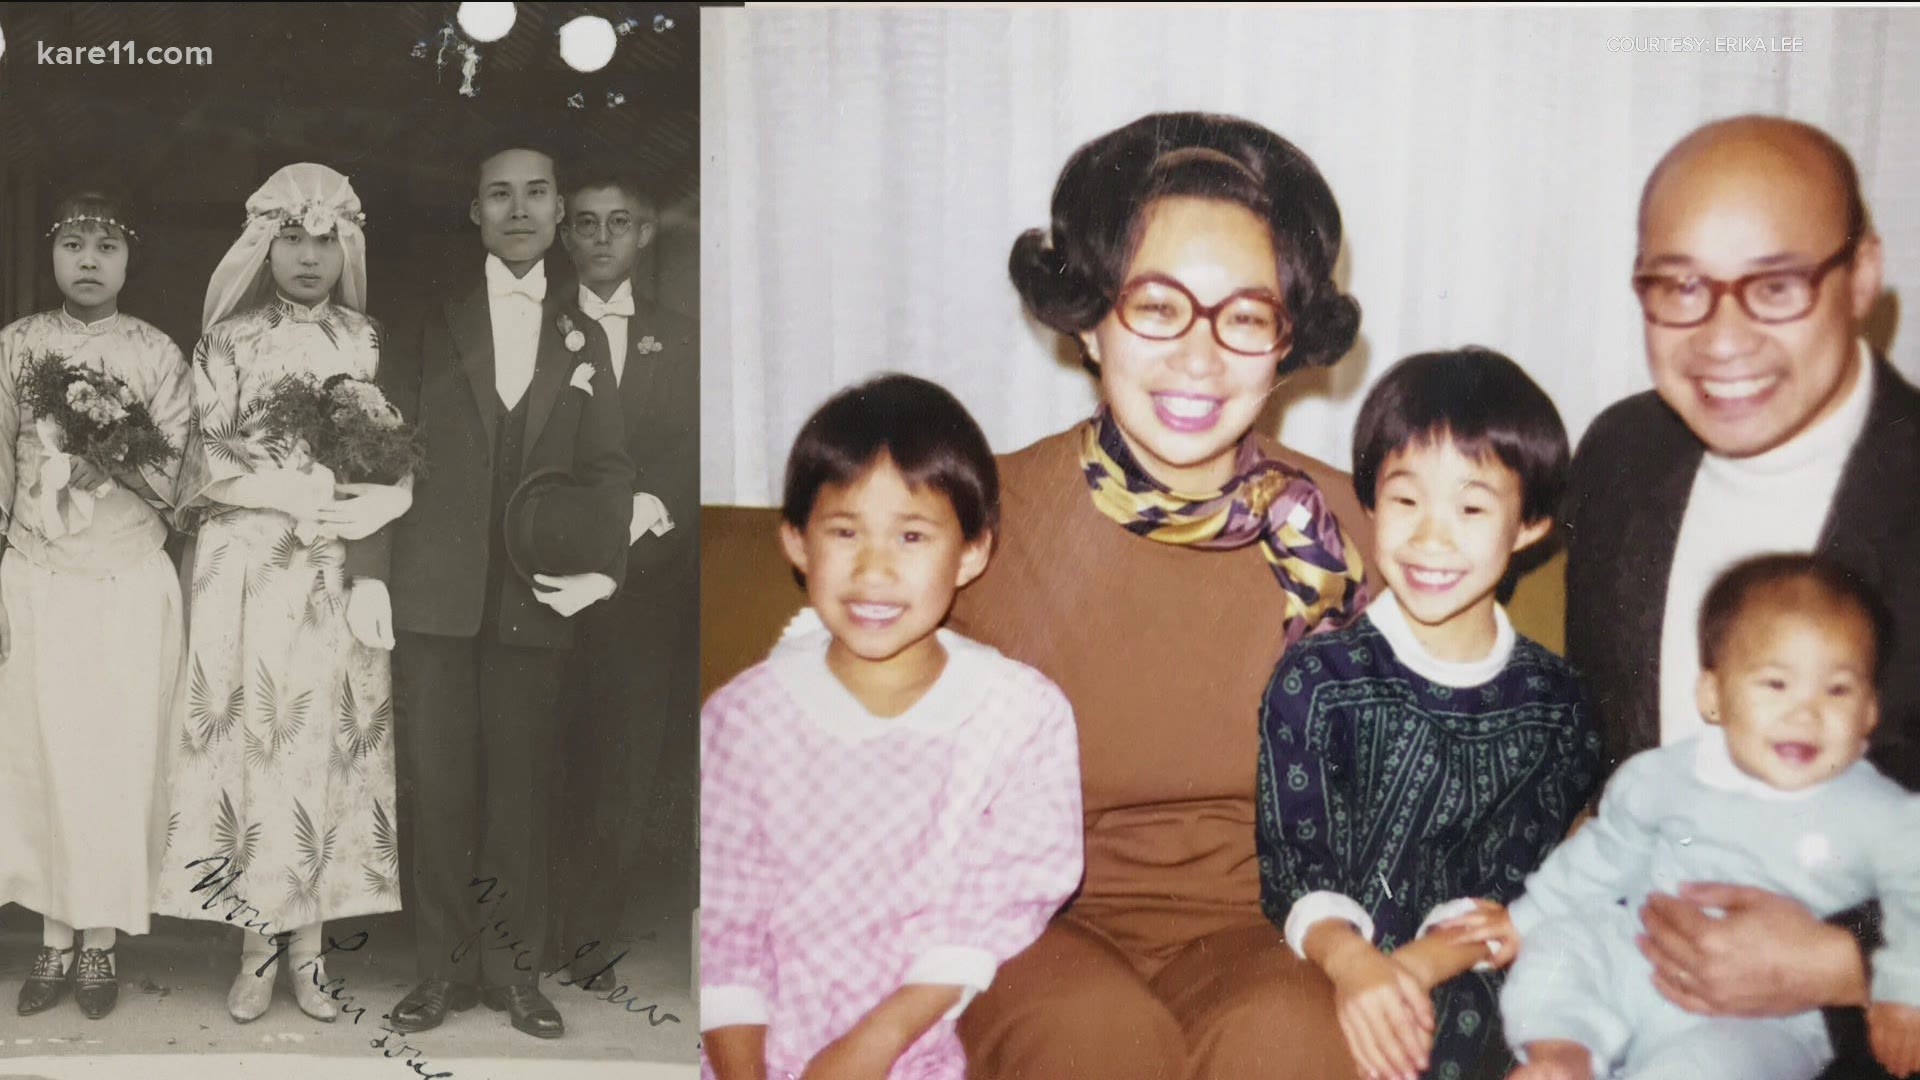 Dr. Erika Lee is one of the foremost historians on Asian Americans in the U.S., and she said the Chinese Exclusion Act had a direct impact on her family.